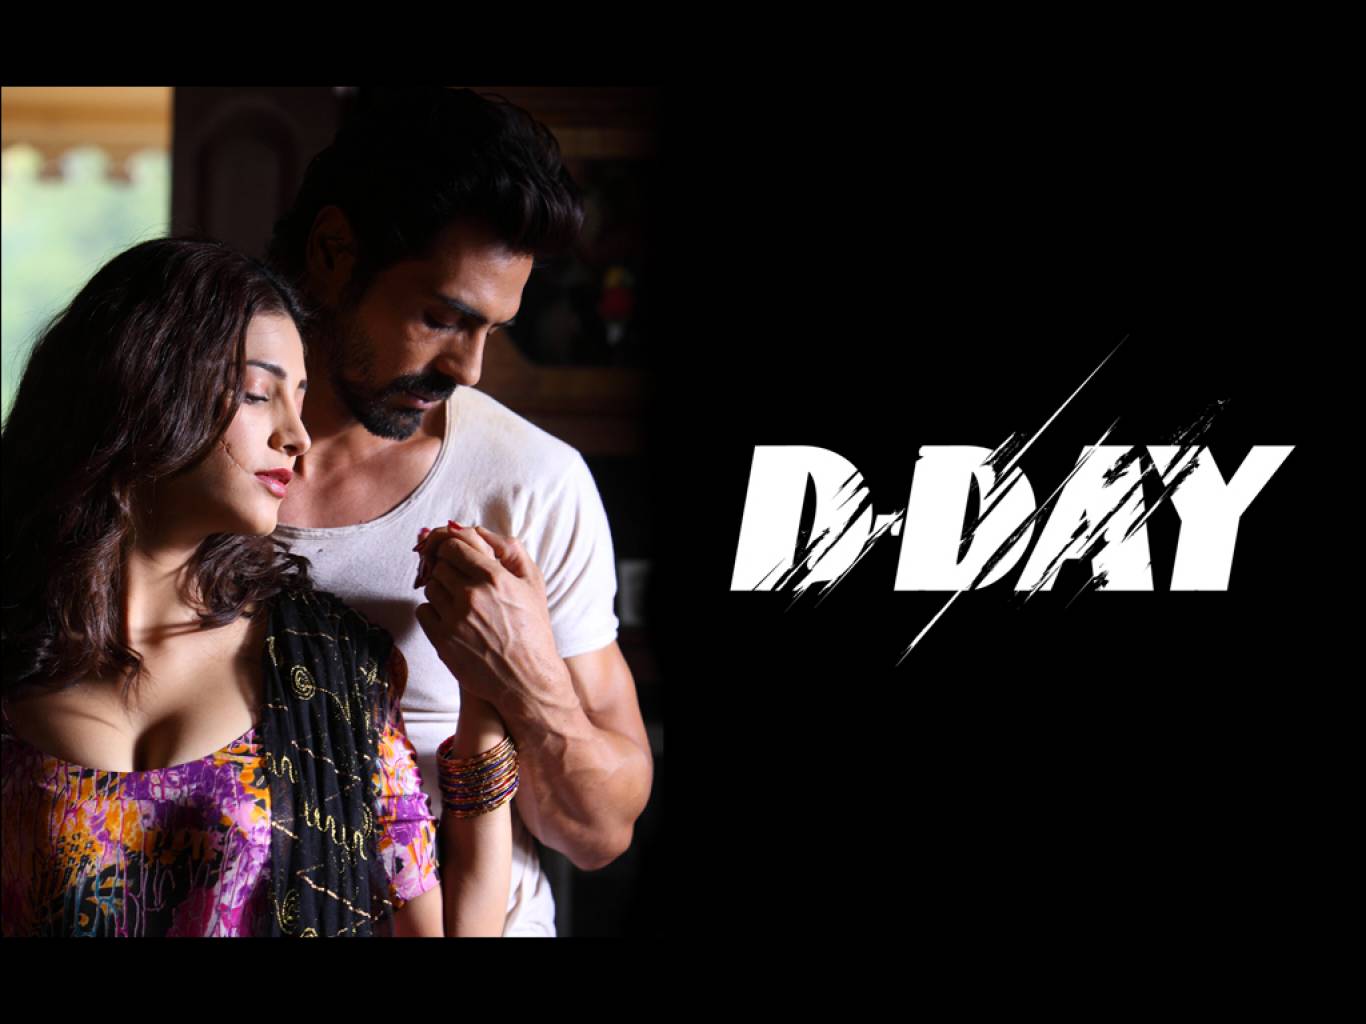 D Day Movie HD Wallpaper. D Day HD Movie Wallpaper Free Download (1080p to 2K)